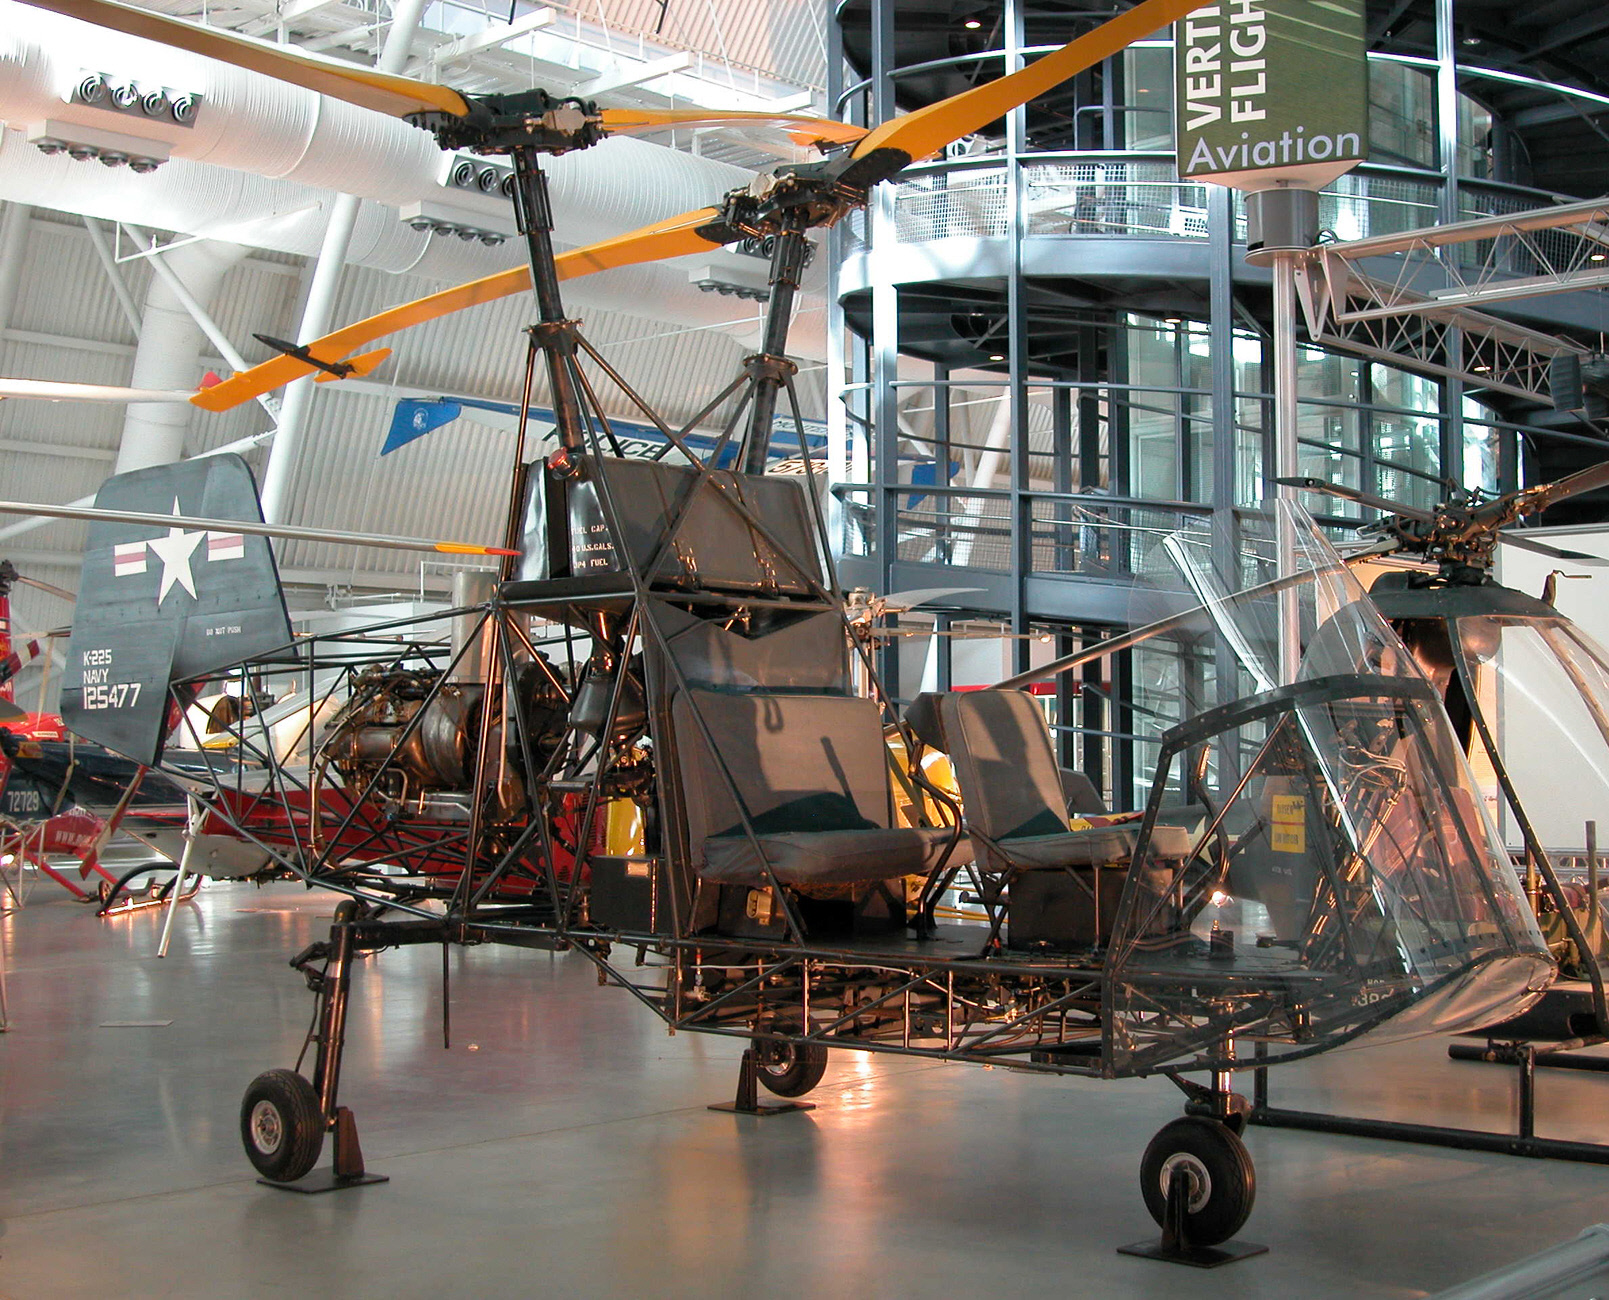 Kaman K-225, Bu. No. 125477, the first gas turbine-powered helicopter, at the Vertical Flight Gallery, Steven F. Udvar-Hazy Center, Smithsonian Institution National Air and Space Museum, Chantilly, Virginia. (NASM)